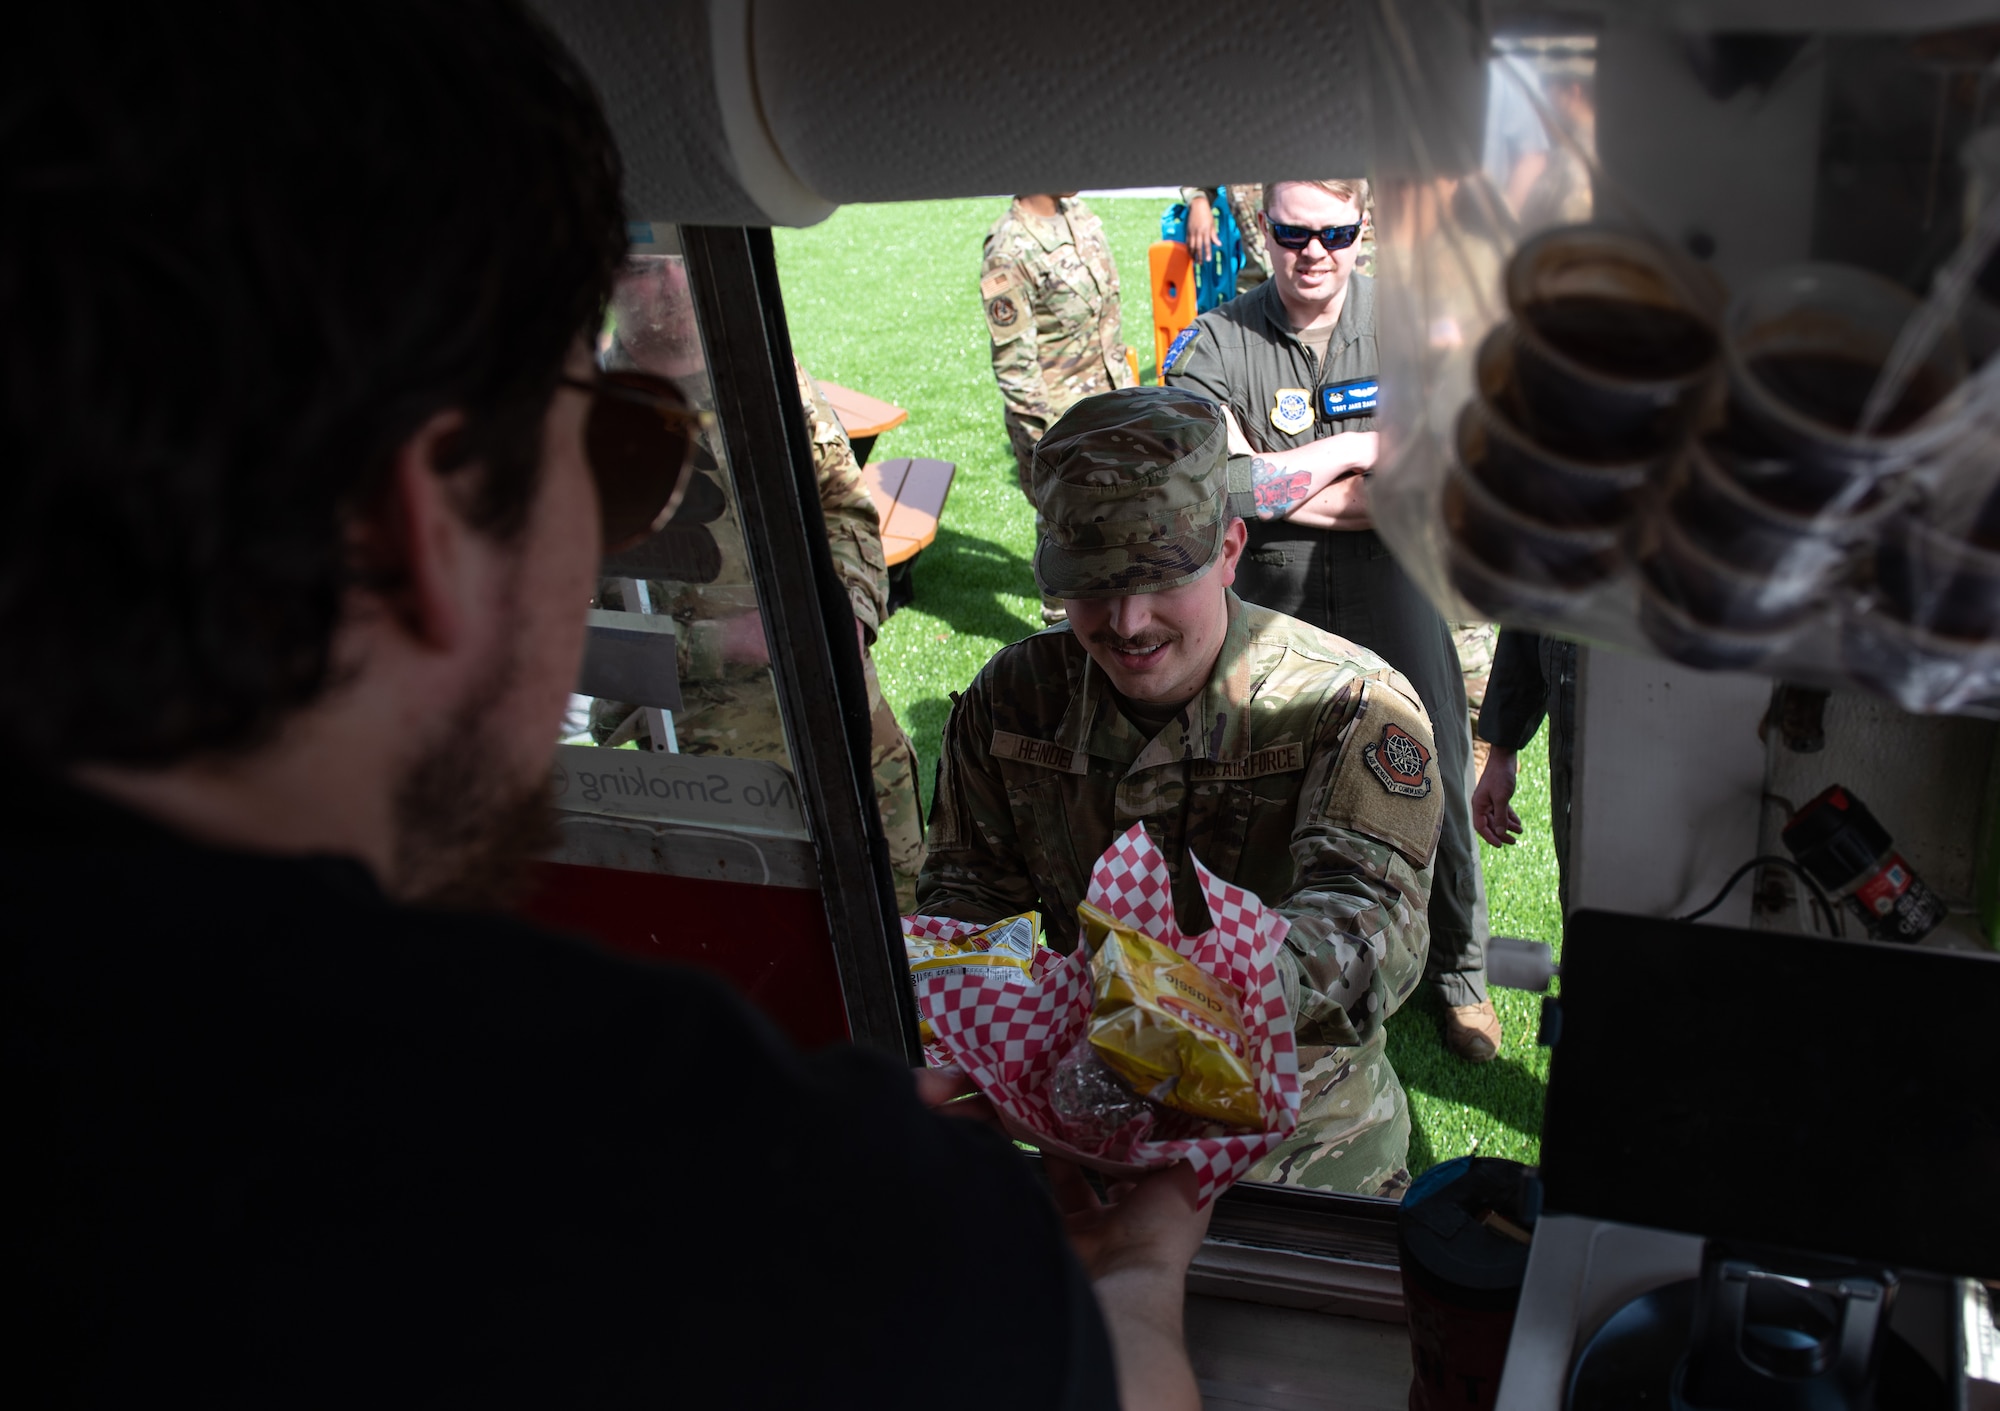 A Team McConnell Airman receives his food from a food truck employee during the grand opening for the food truck park at McConnell Air Force Base, Kansas, April 4, 2023. The food truck park provides a variety of easily accessible food for Team McConnell servicemembers. (U.S. Air Force photo by Staff Sgt. Tryphena Mayhugh)